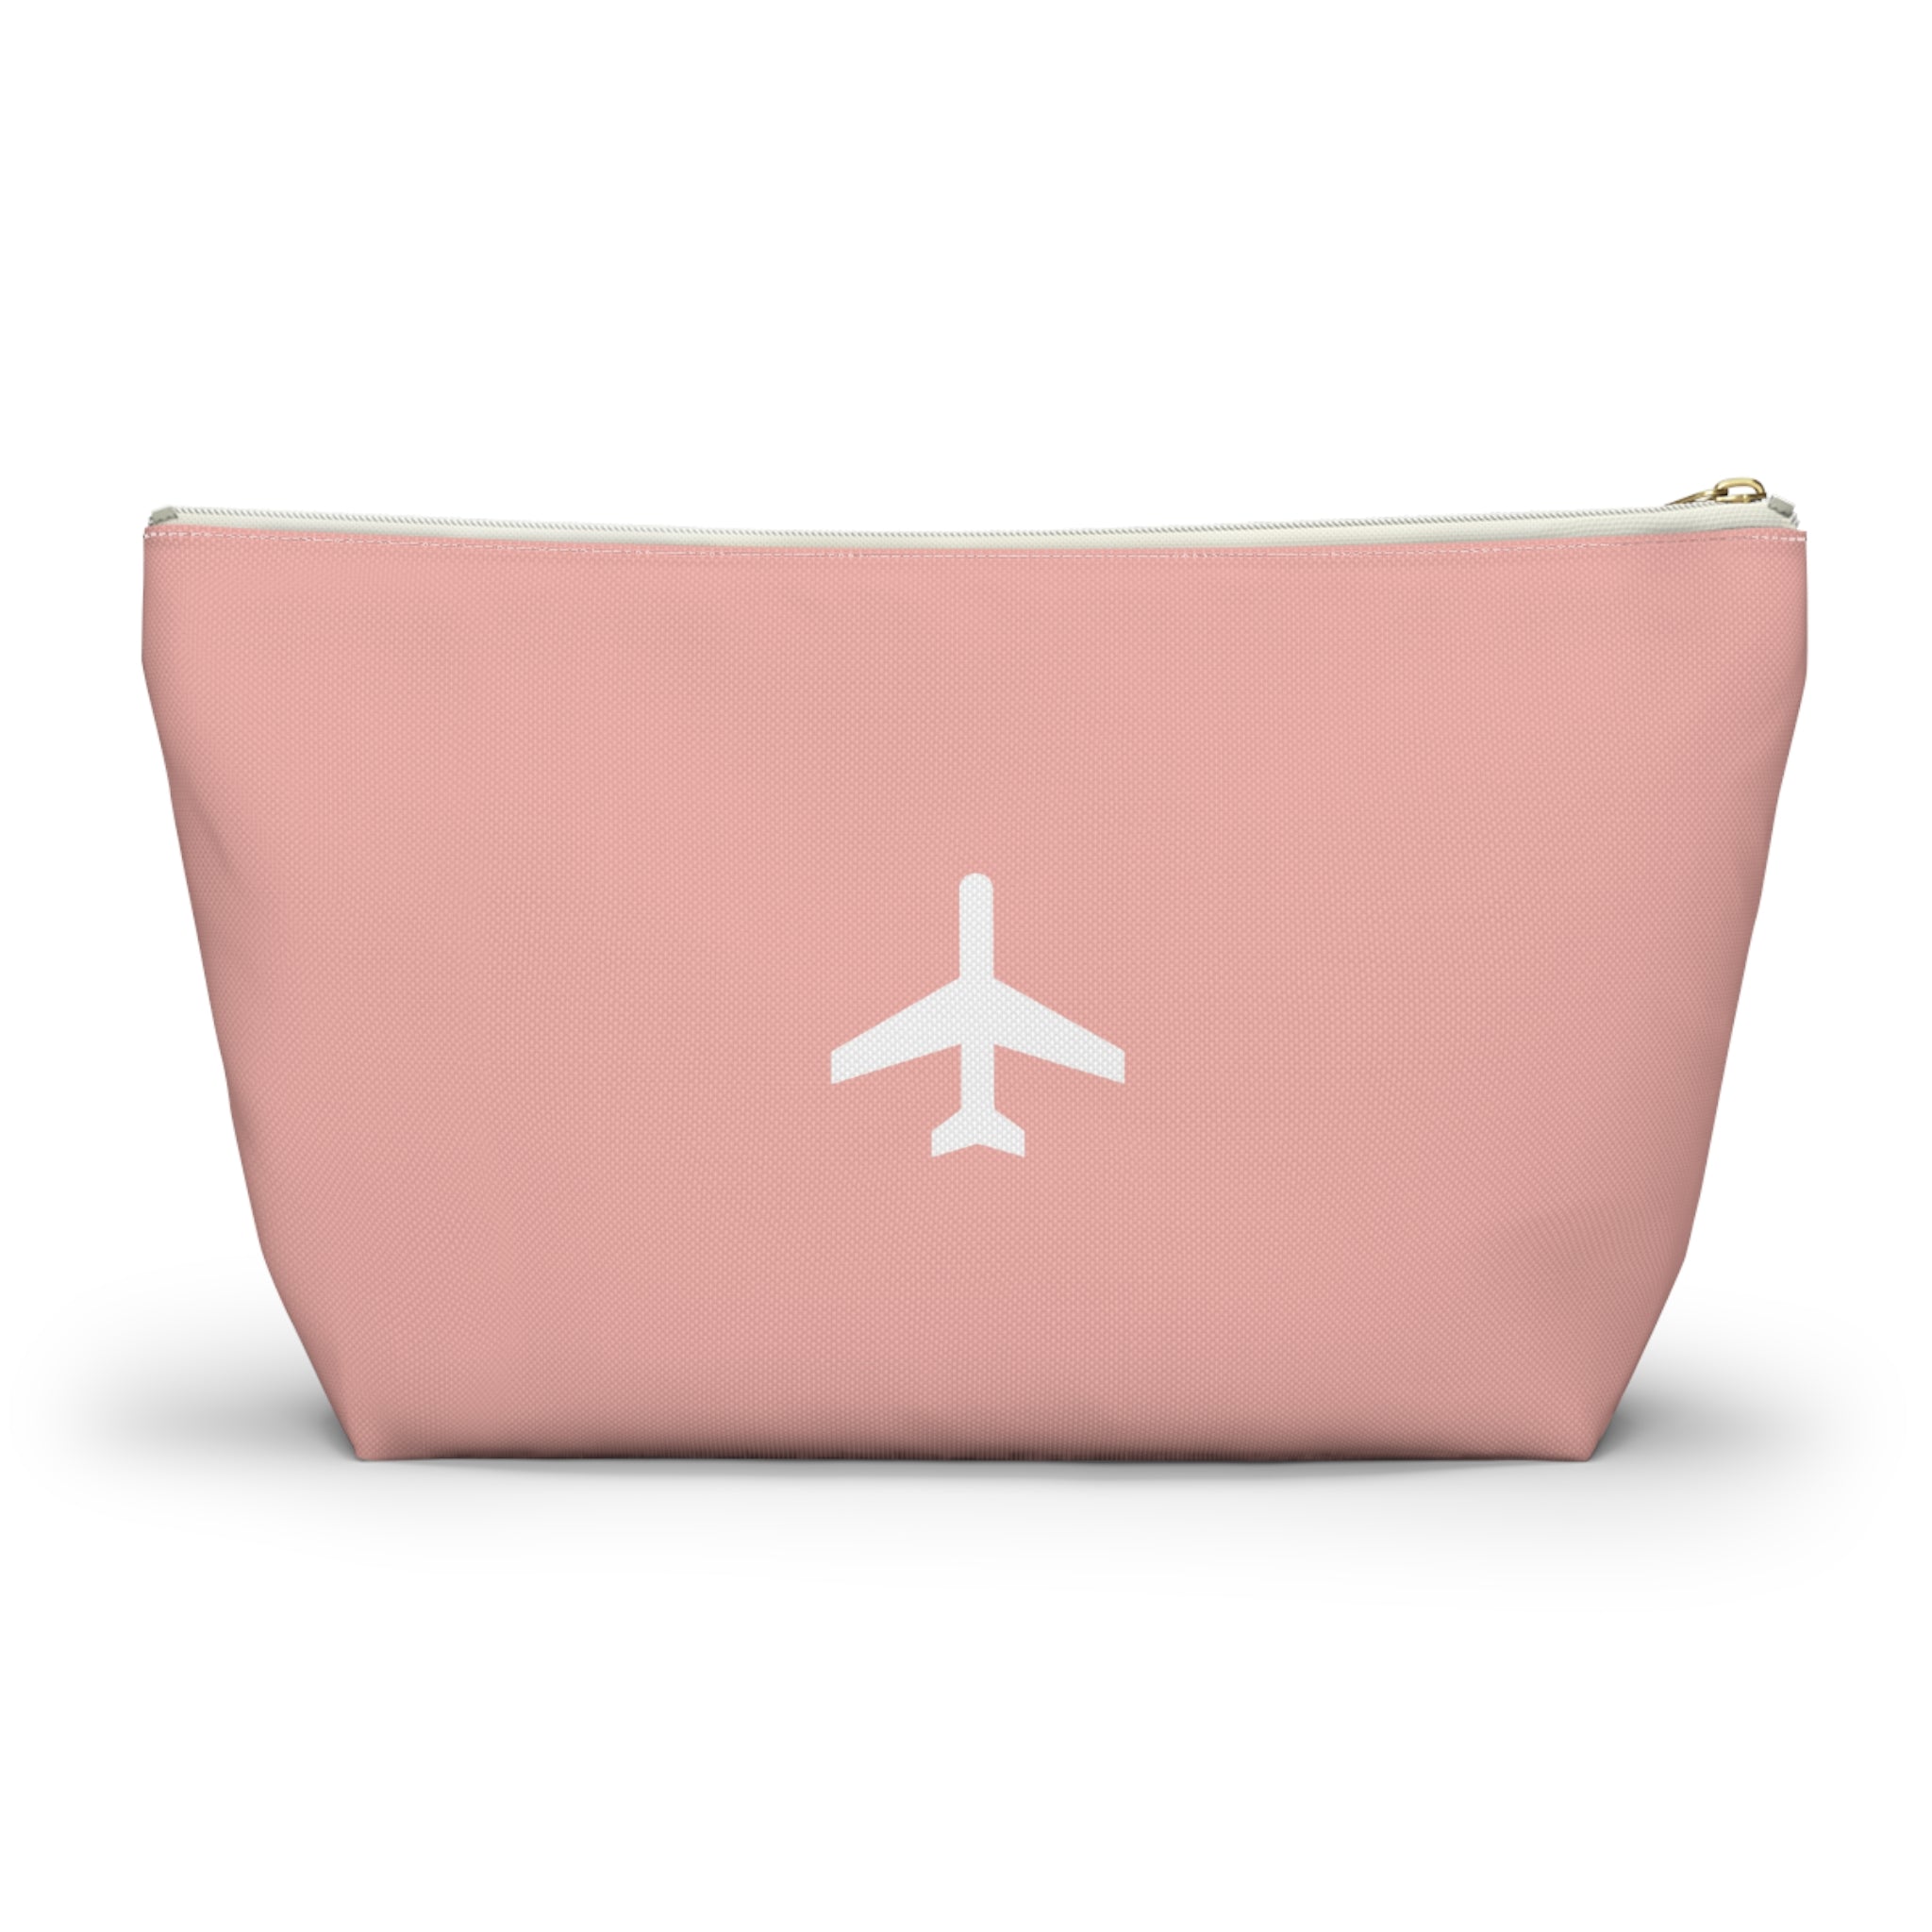 Plane hair don't care Pouch (Pink)